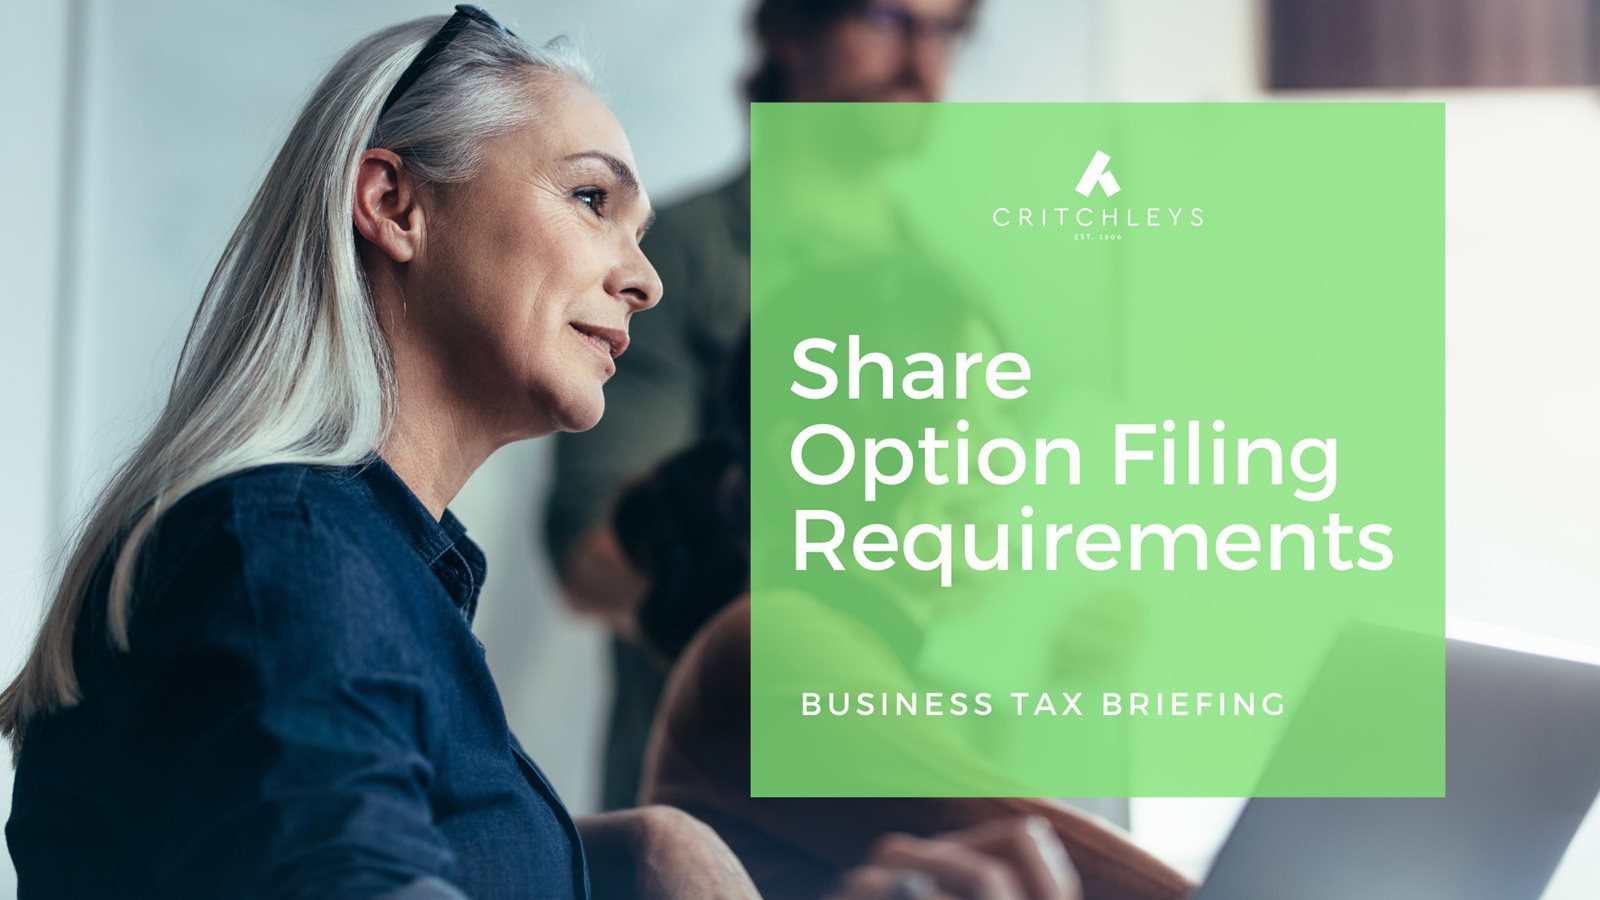 Share Option Filing Requirements